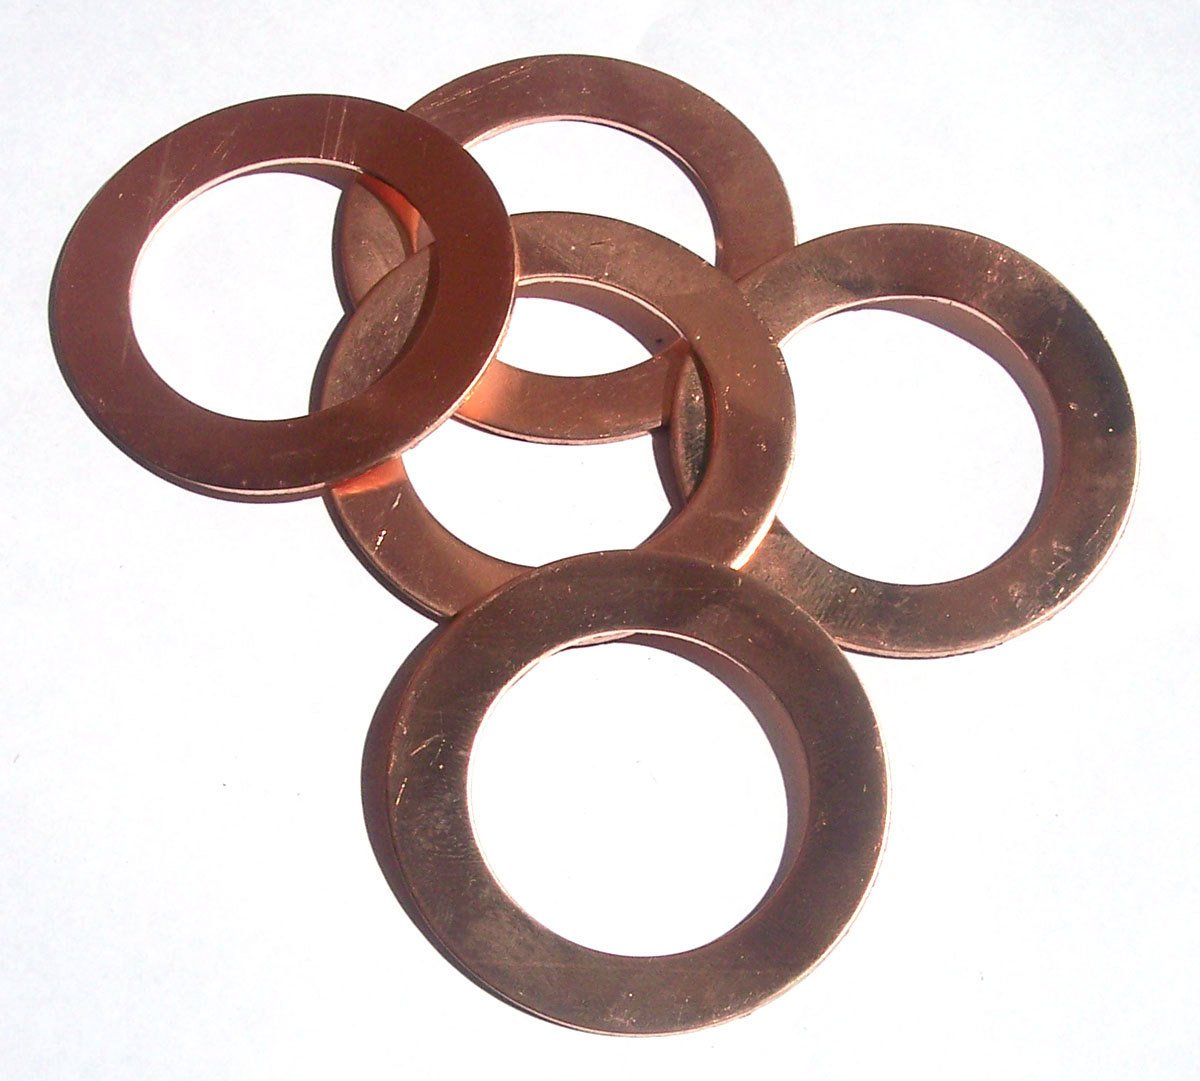 Copper 45mm Donut Eternal Circle Blanks for Enameling Stamping Texturing Metalworking Charm - Jewelry Supplies - 4 Pieces